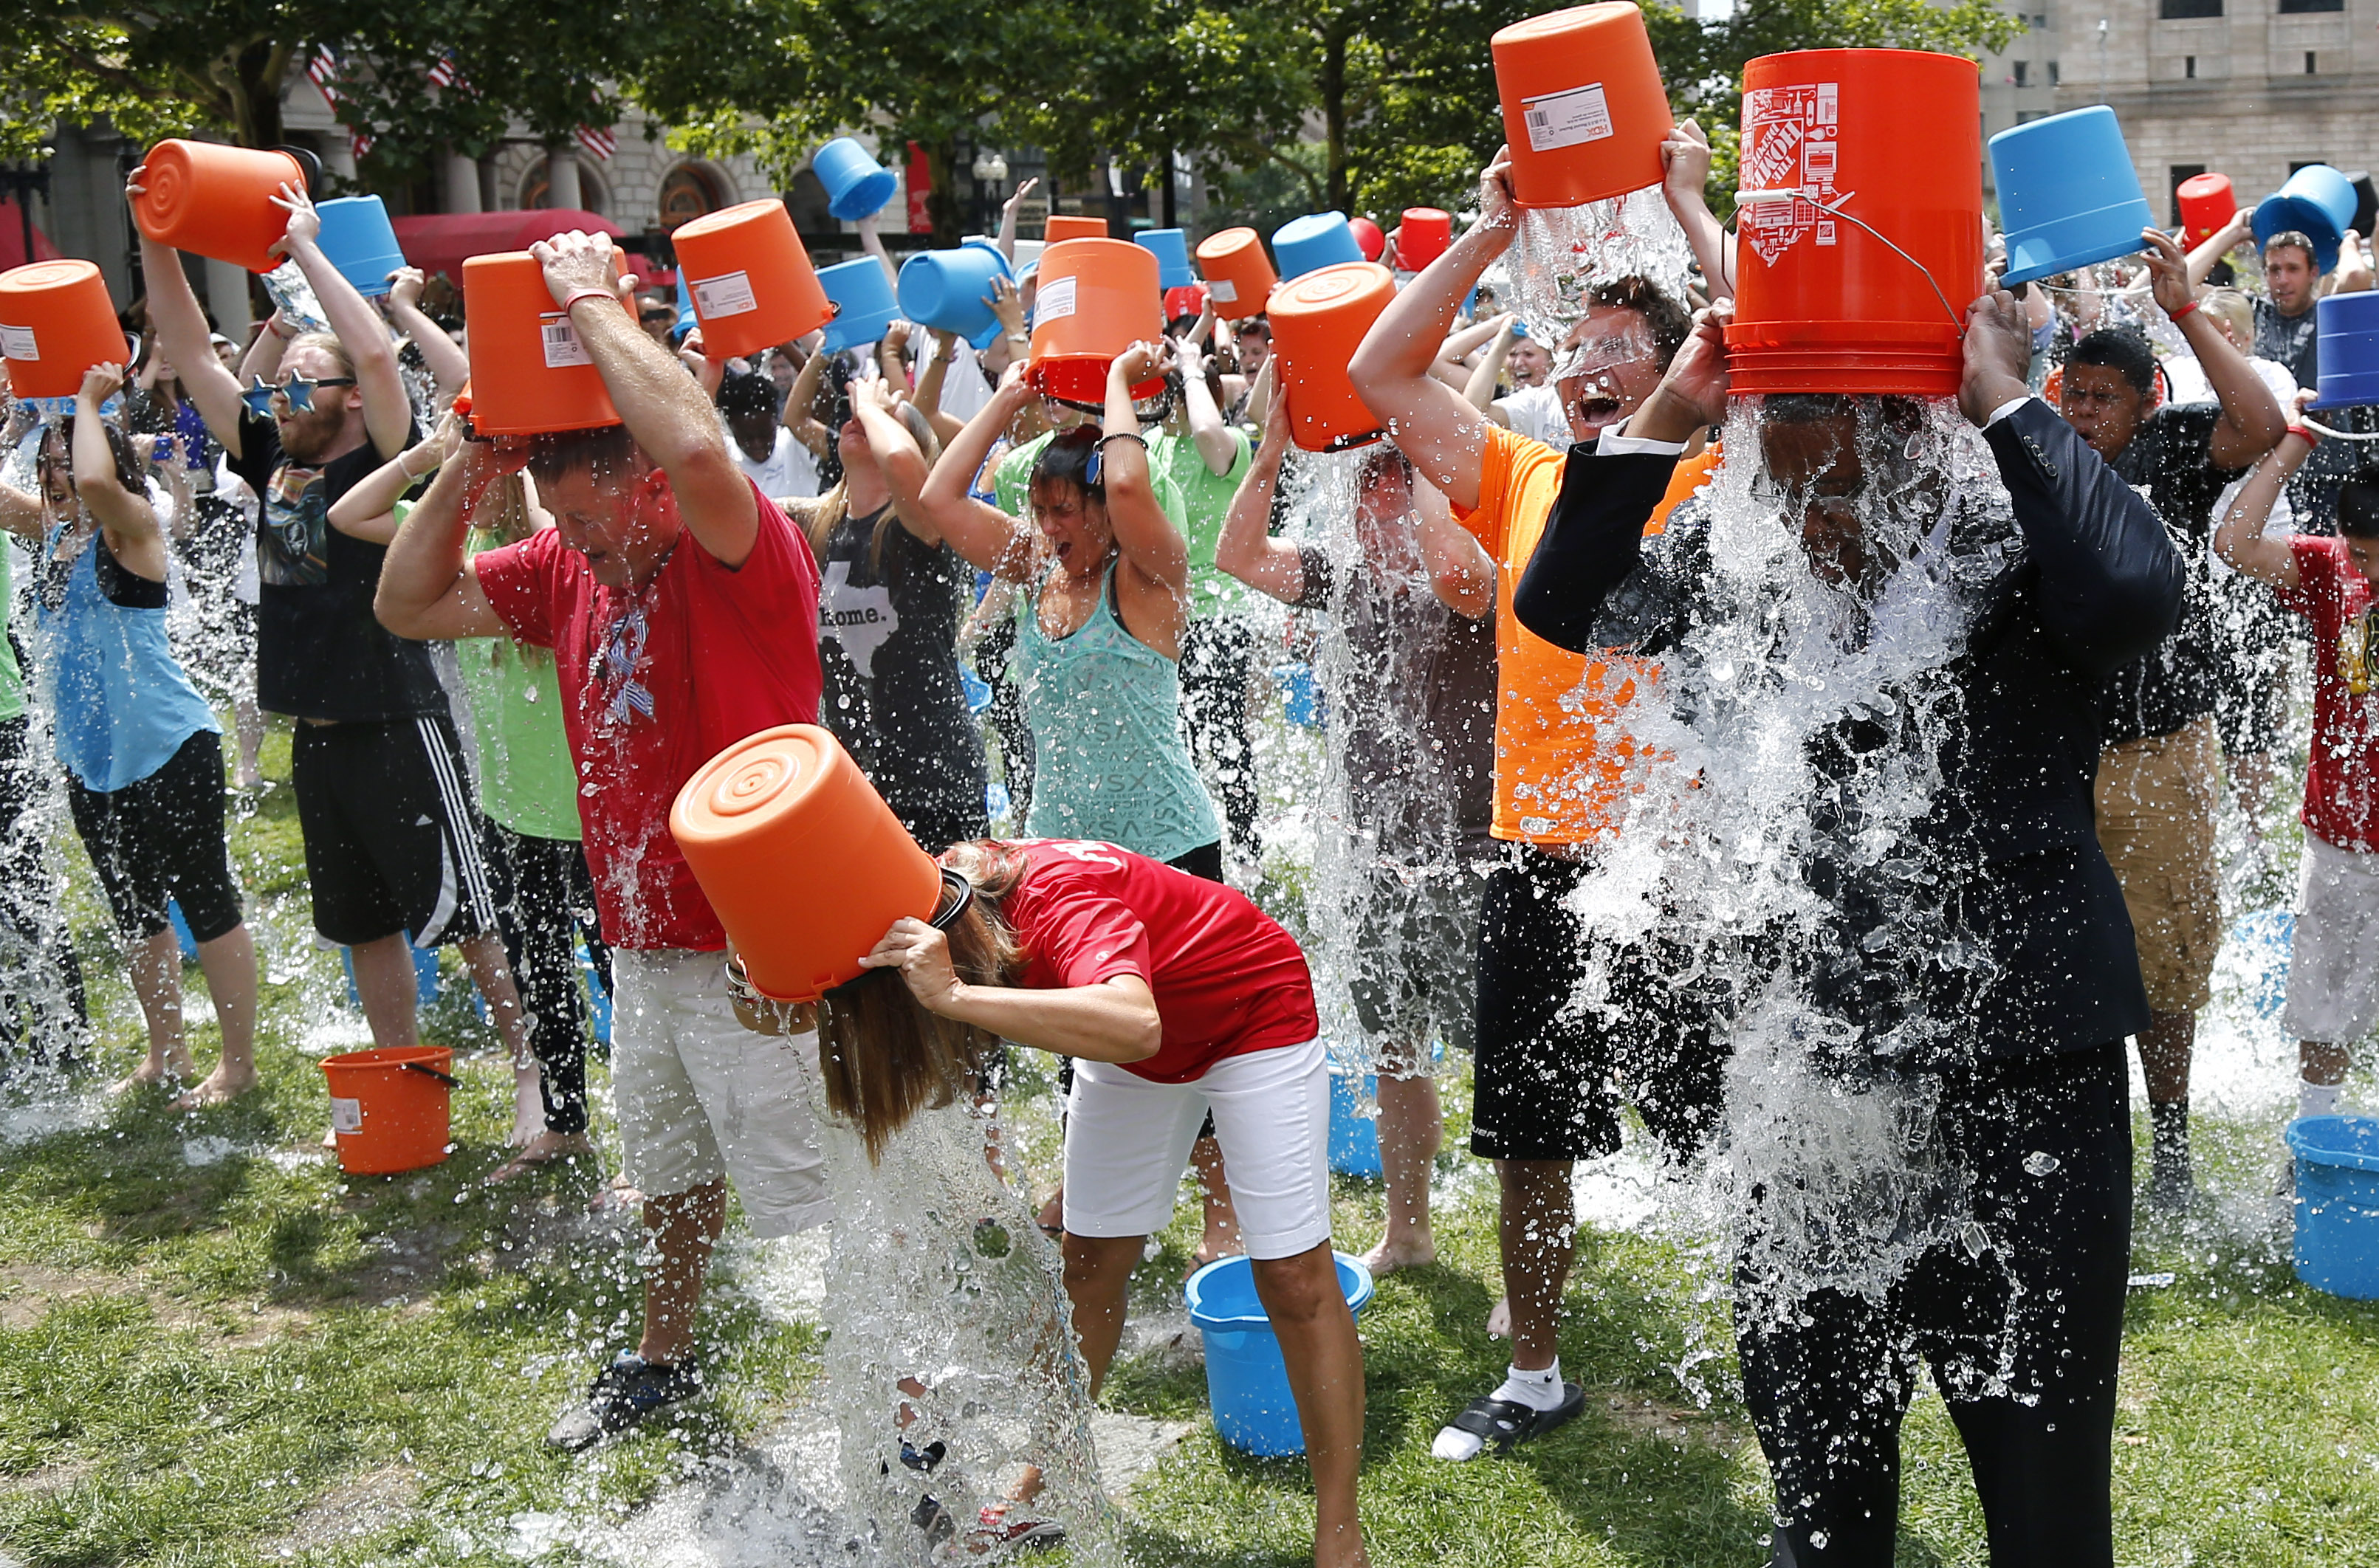 Boston City Councillor Tito Jackson, right, leads some 200 people in the ice bucket challenge at Boston's Copley Square, Thursday, Aug. 7, 2014 to raise funds and awareness for ALS. (Elise Amendola—AP)